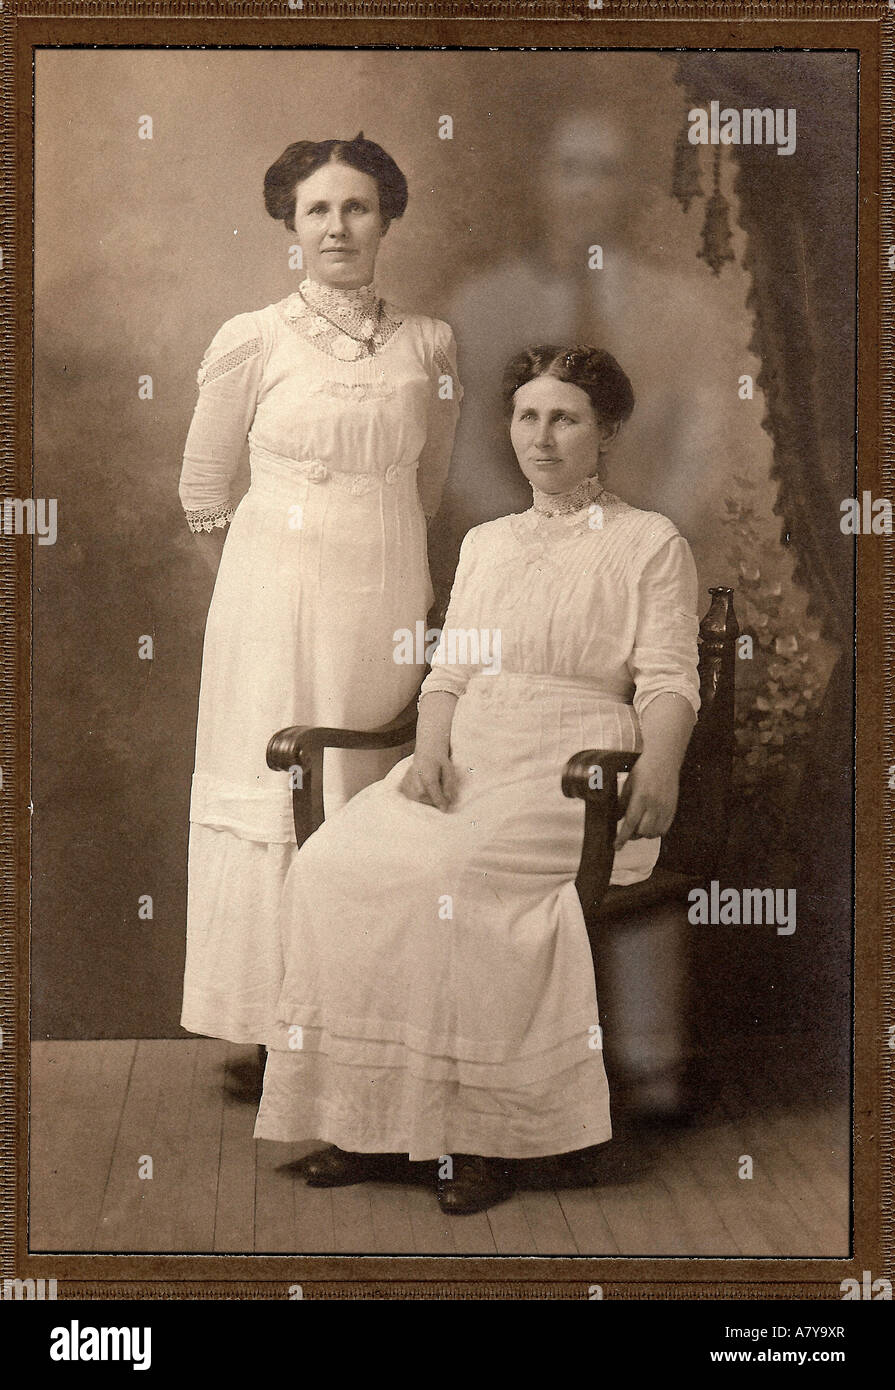 Ghost appearance in vintage photo Stock Photo